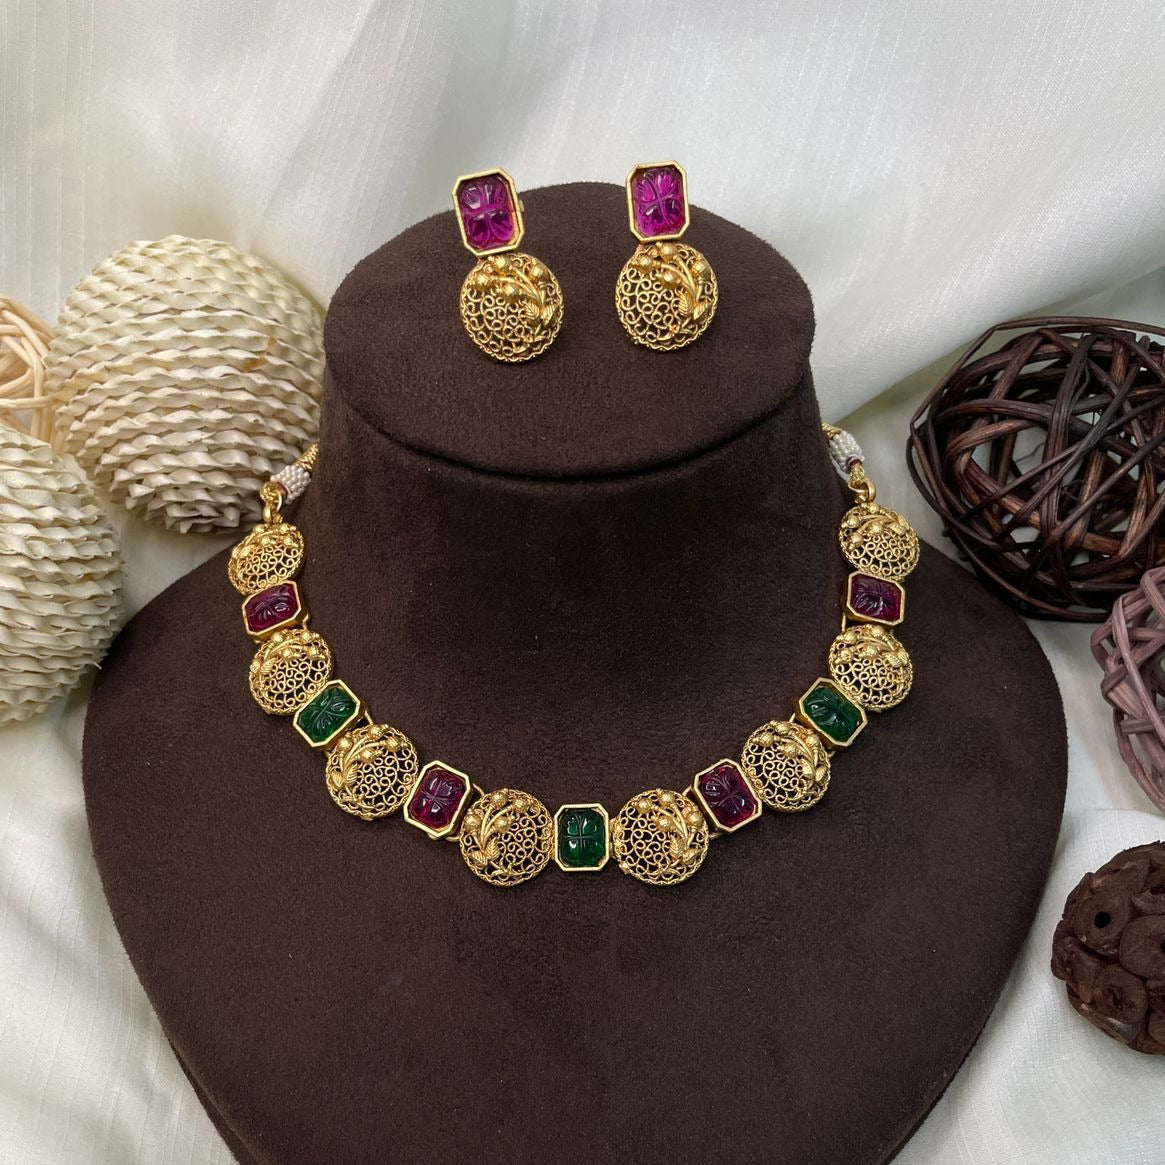 Exclusive Antique Gold Plated Round Necklace - Abdesignsjewellery